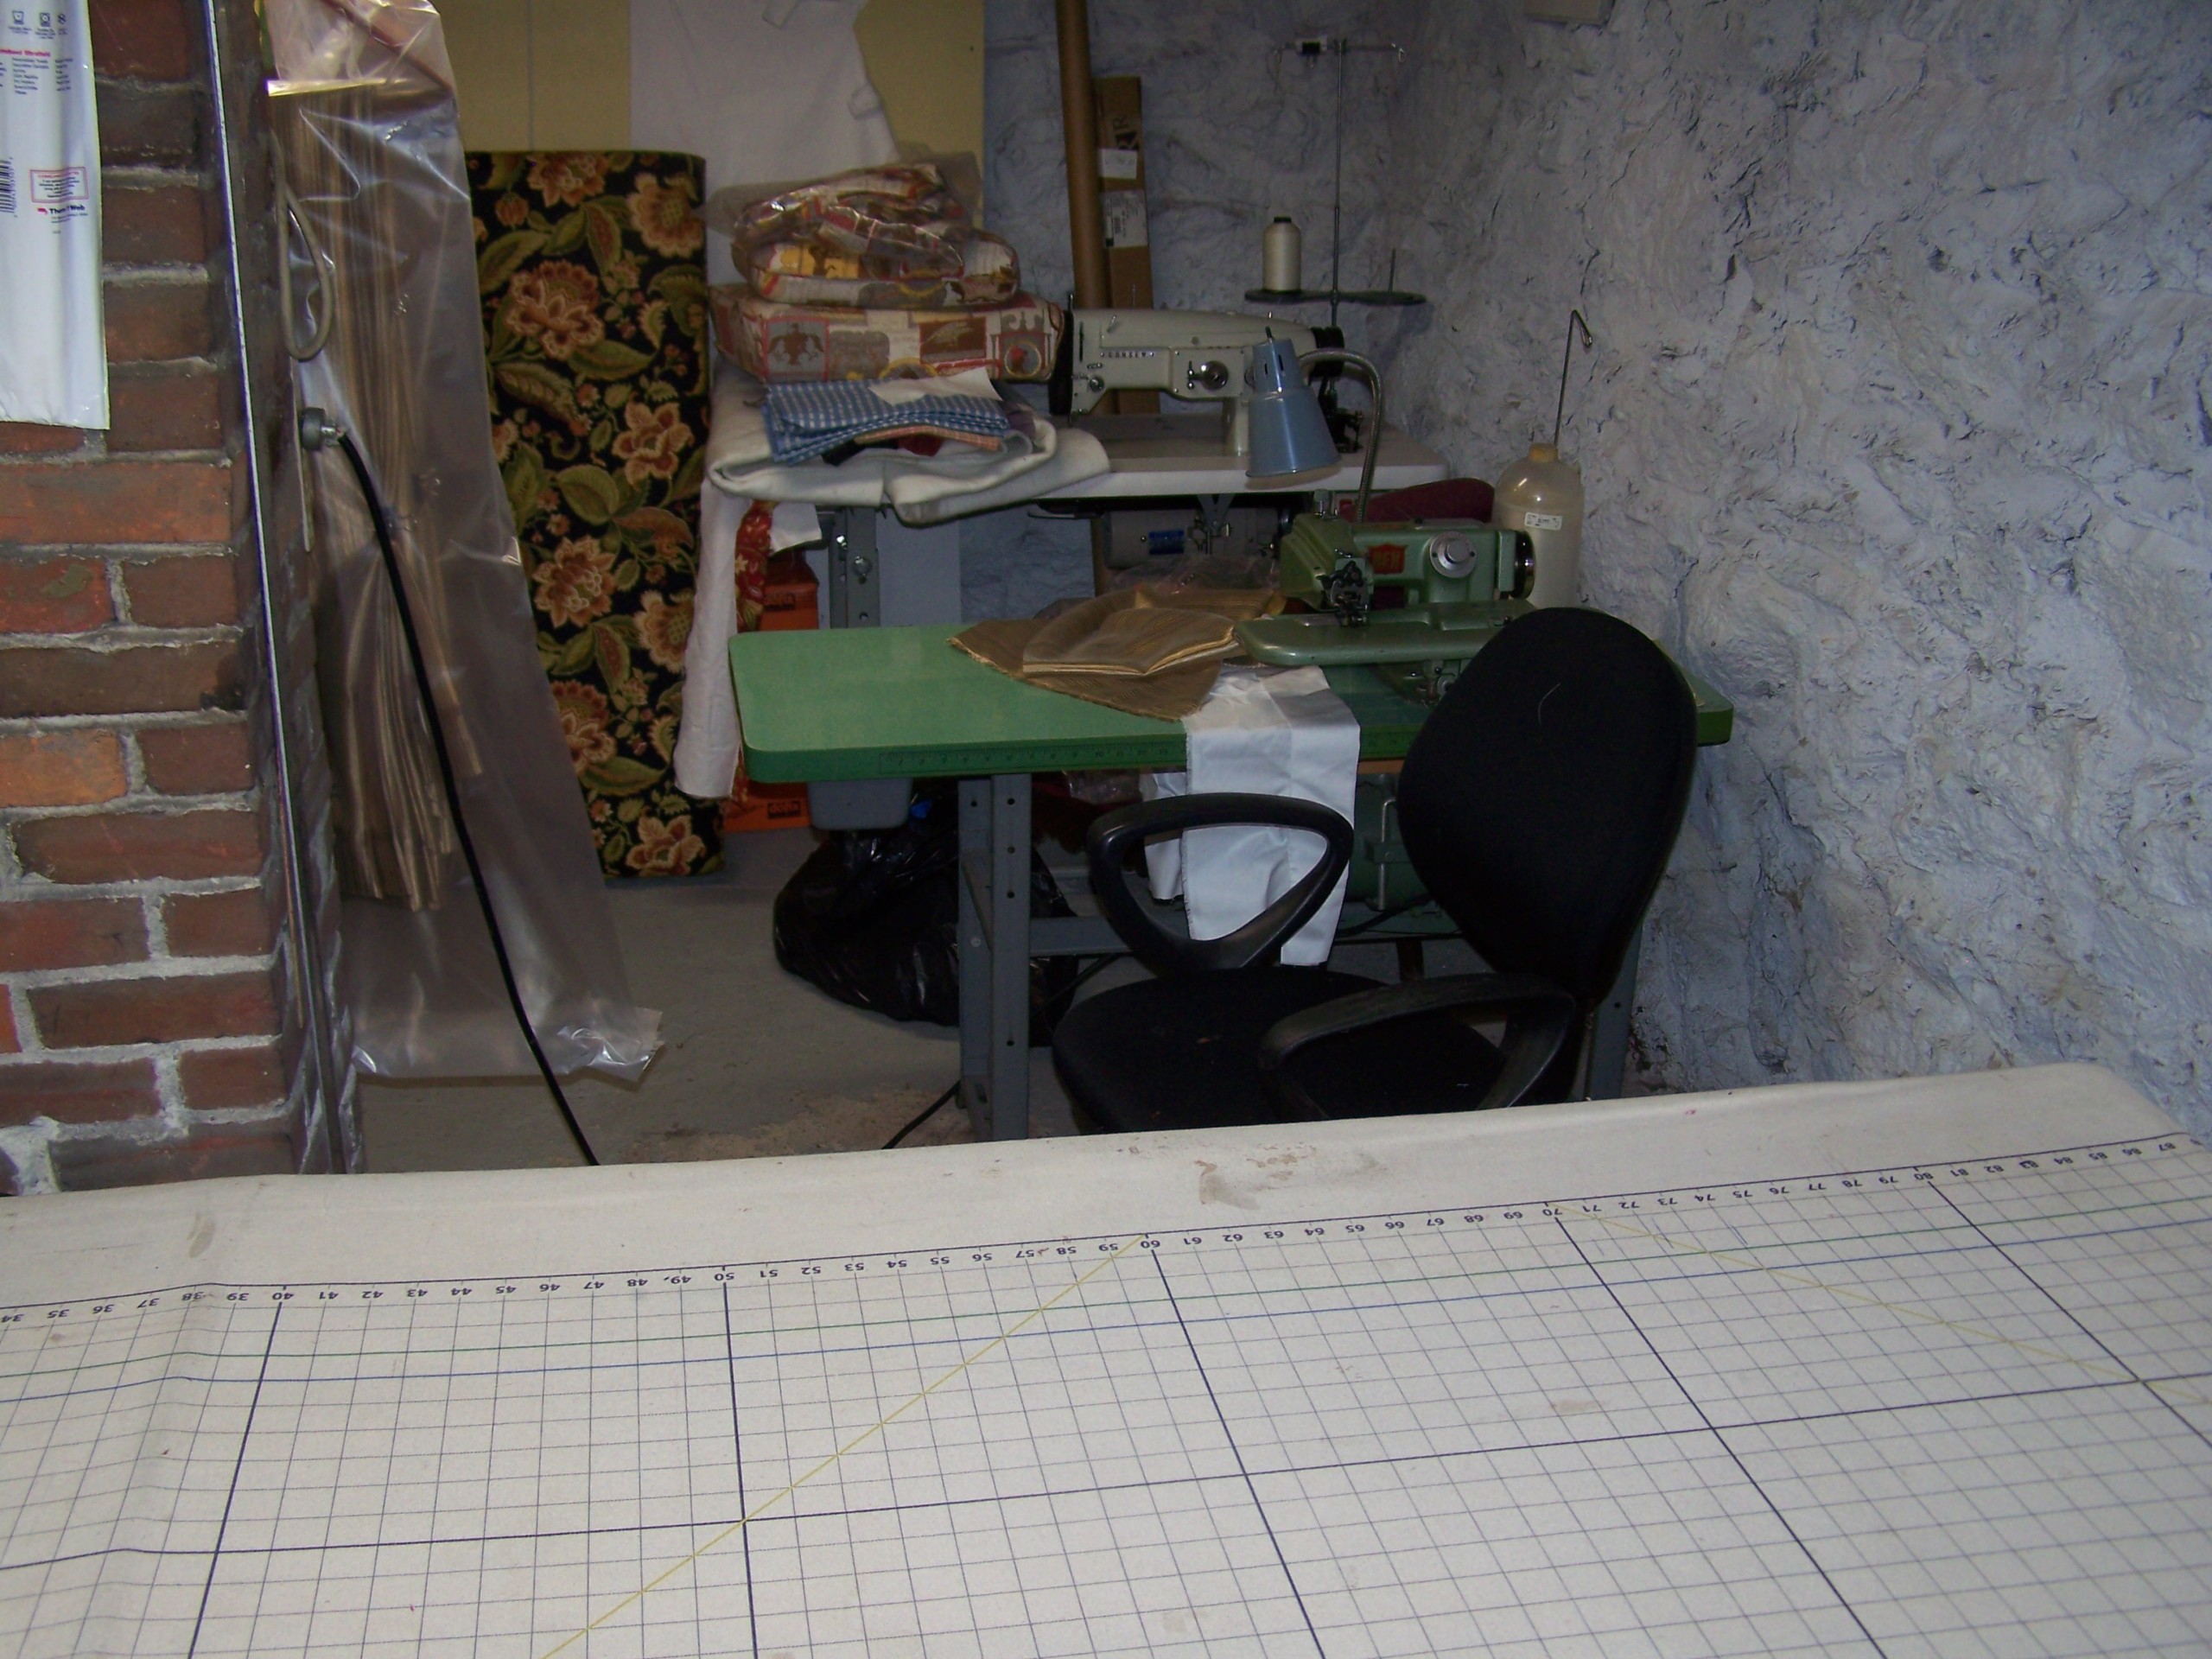 Sewing machines in basement